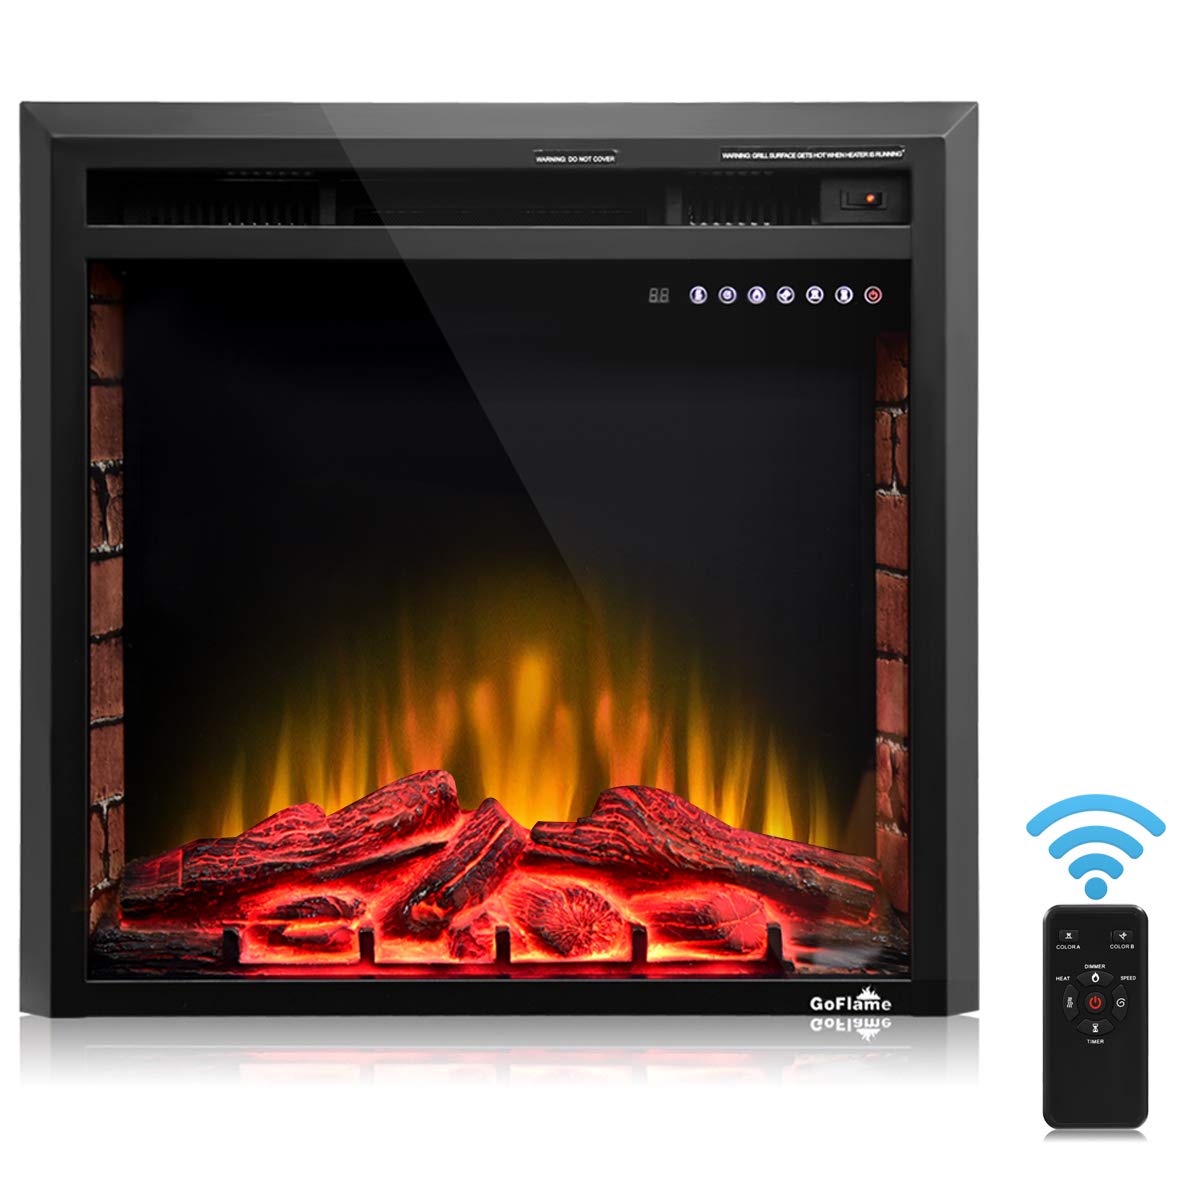 72 Inch Electric Fireplace Elegant Best fort Recessed 36" Electric Fireplace Multi Operating Electric Fireplace Insert with Remote 750w 1500w Built In Electric Fireplace